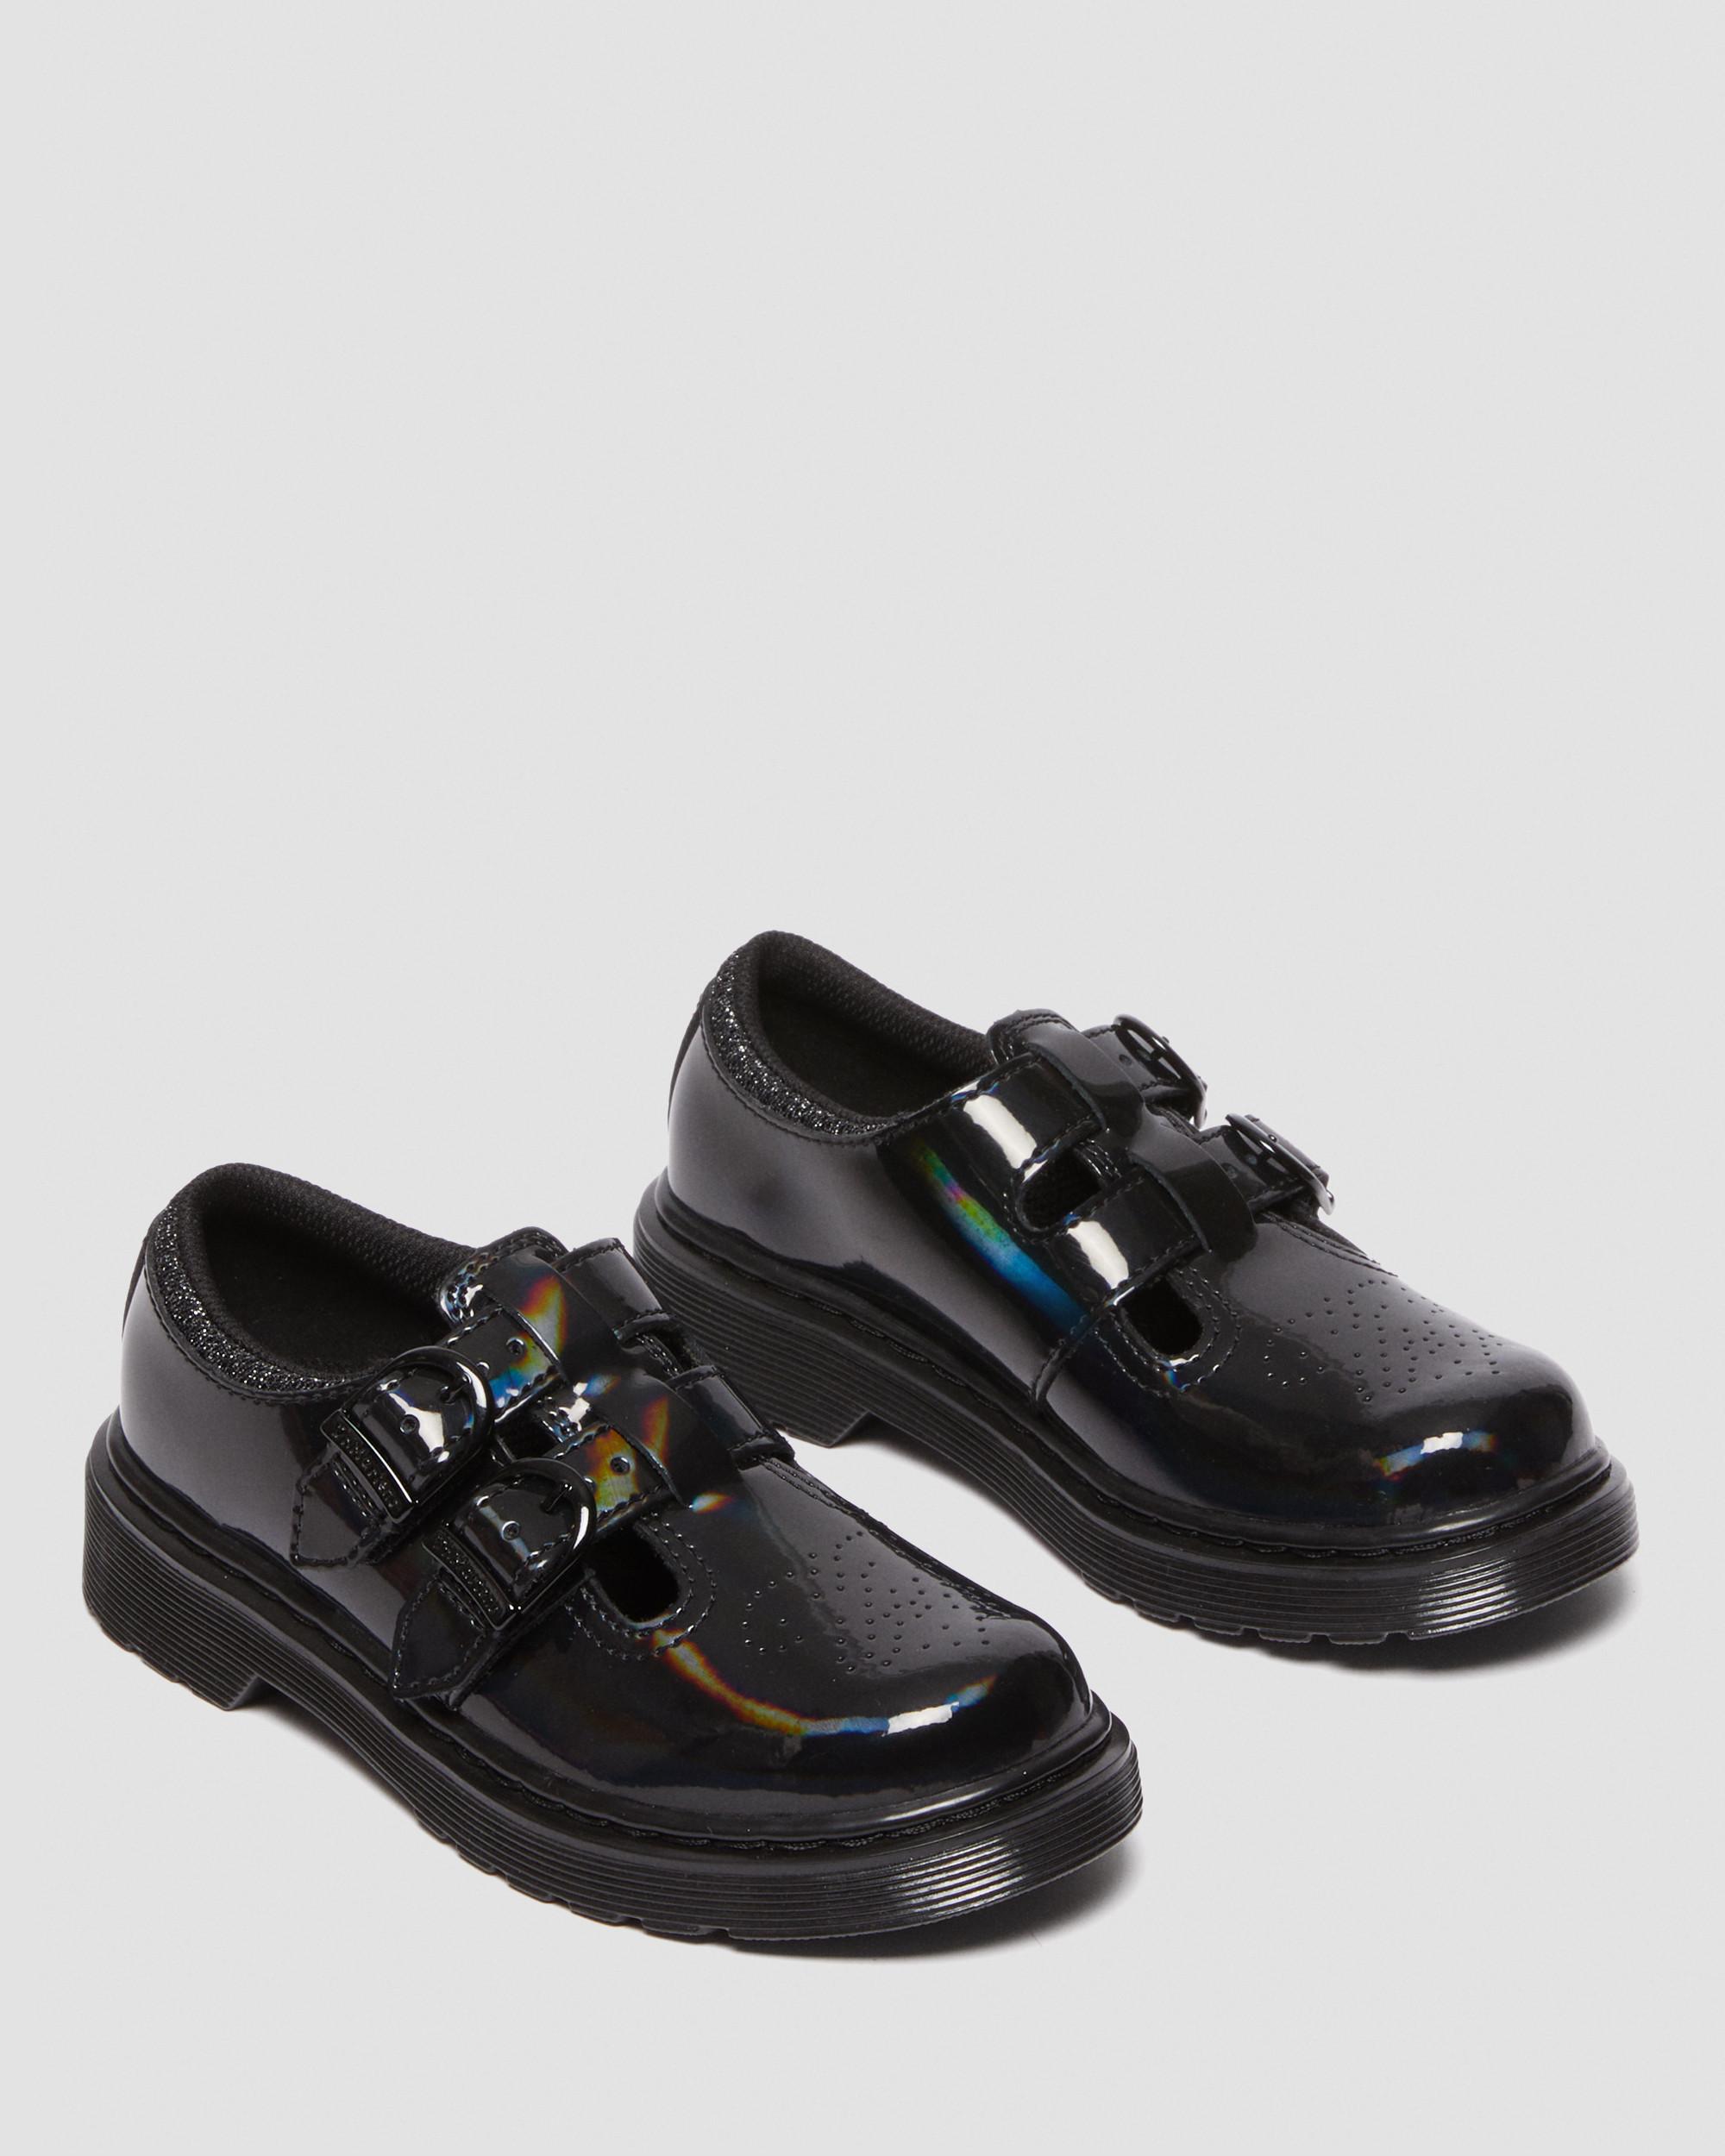 8065 Rainbow Junior Leather Shoes